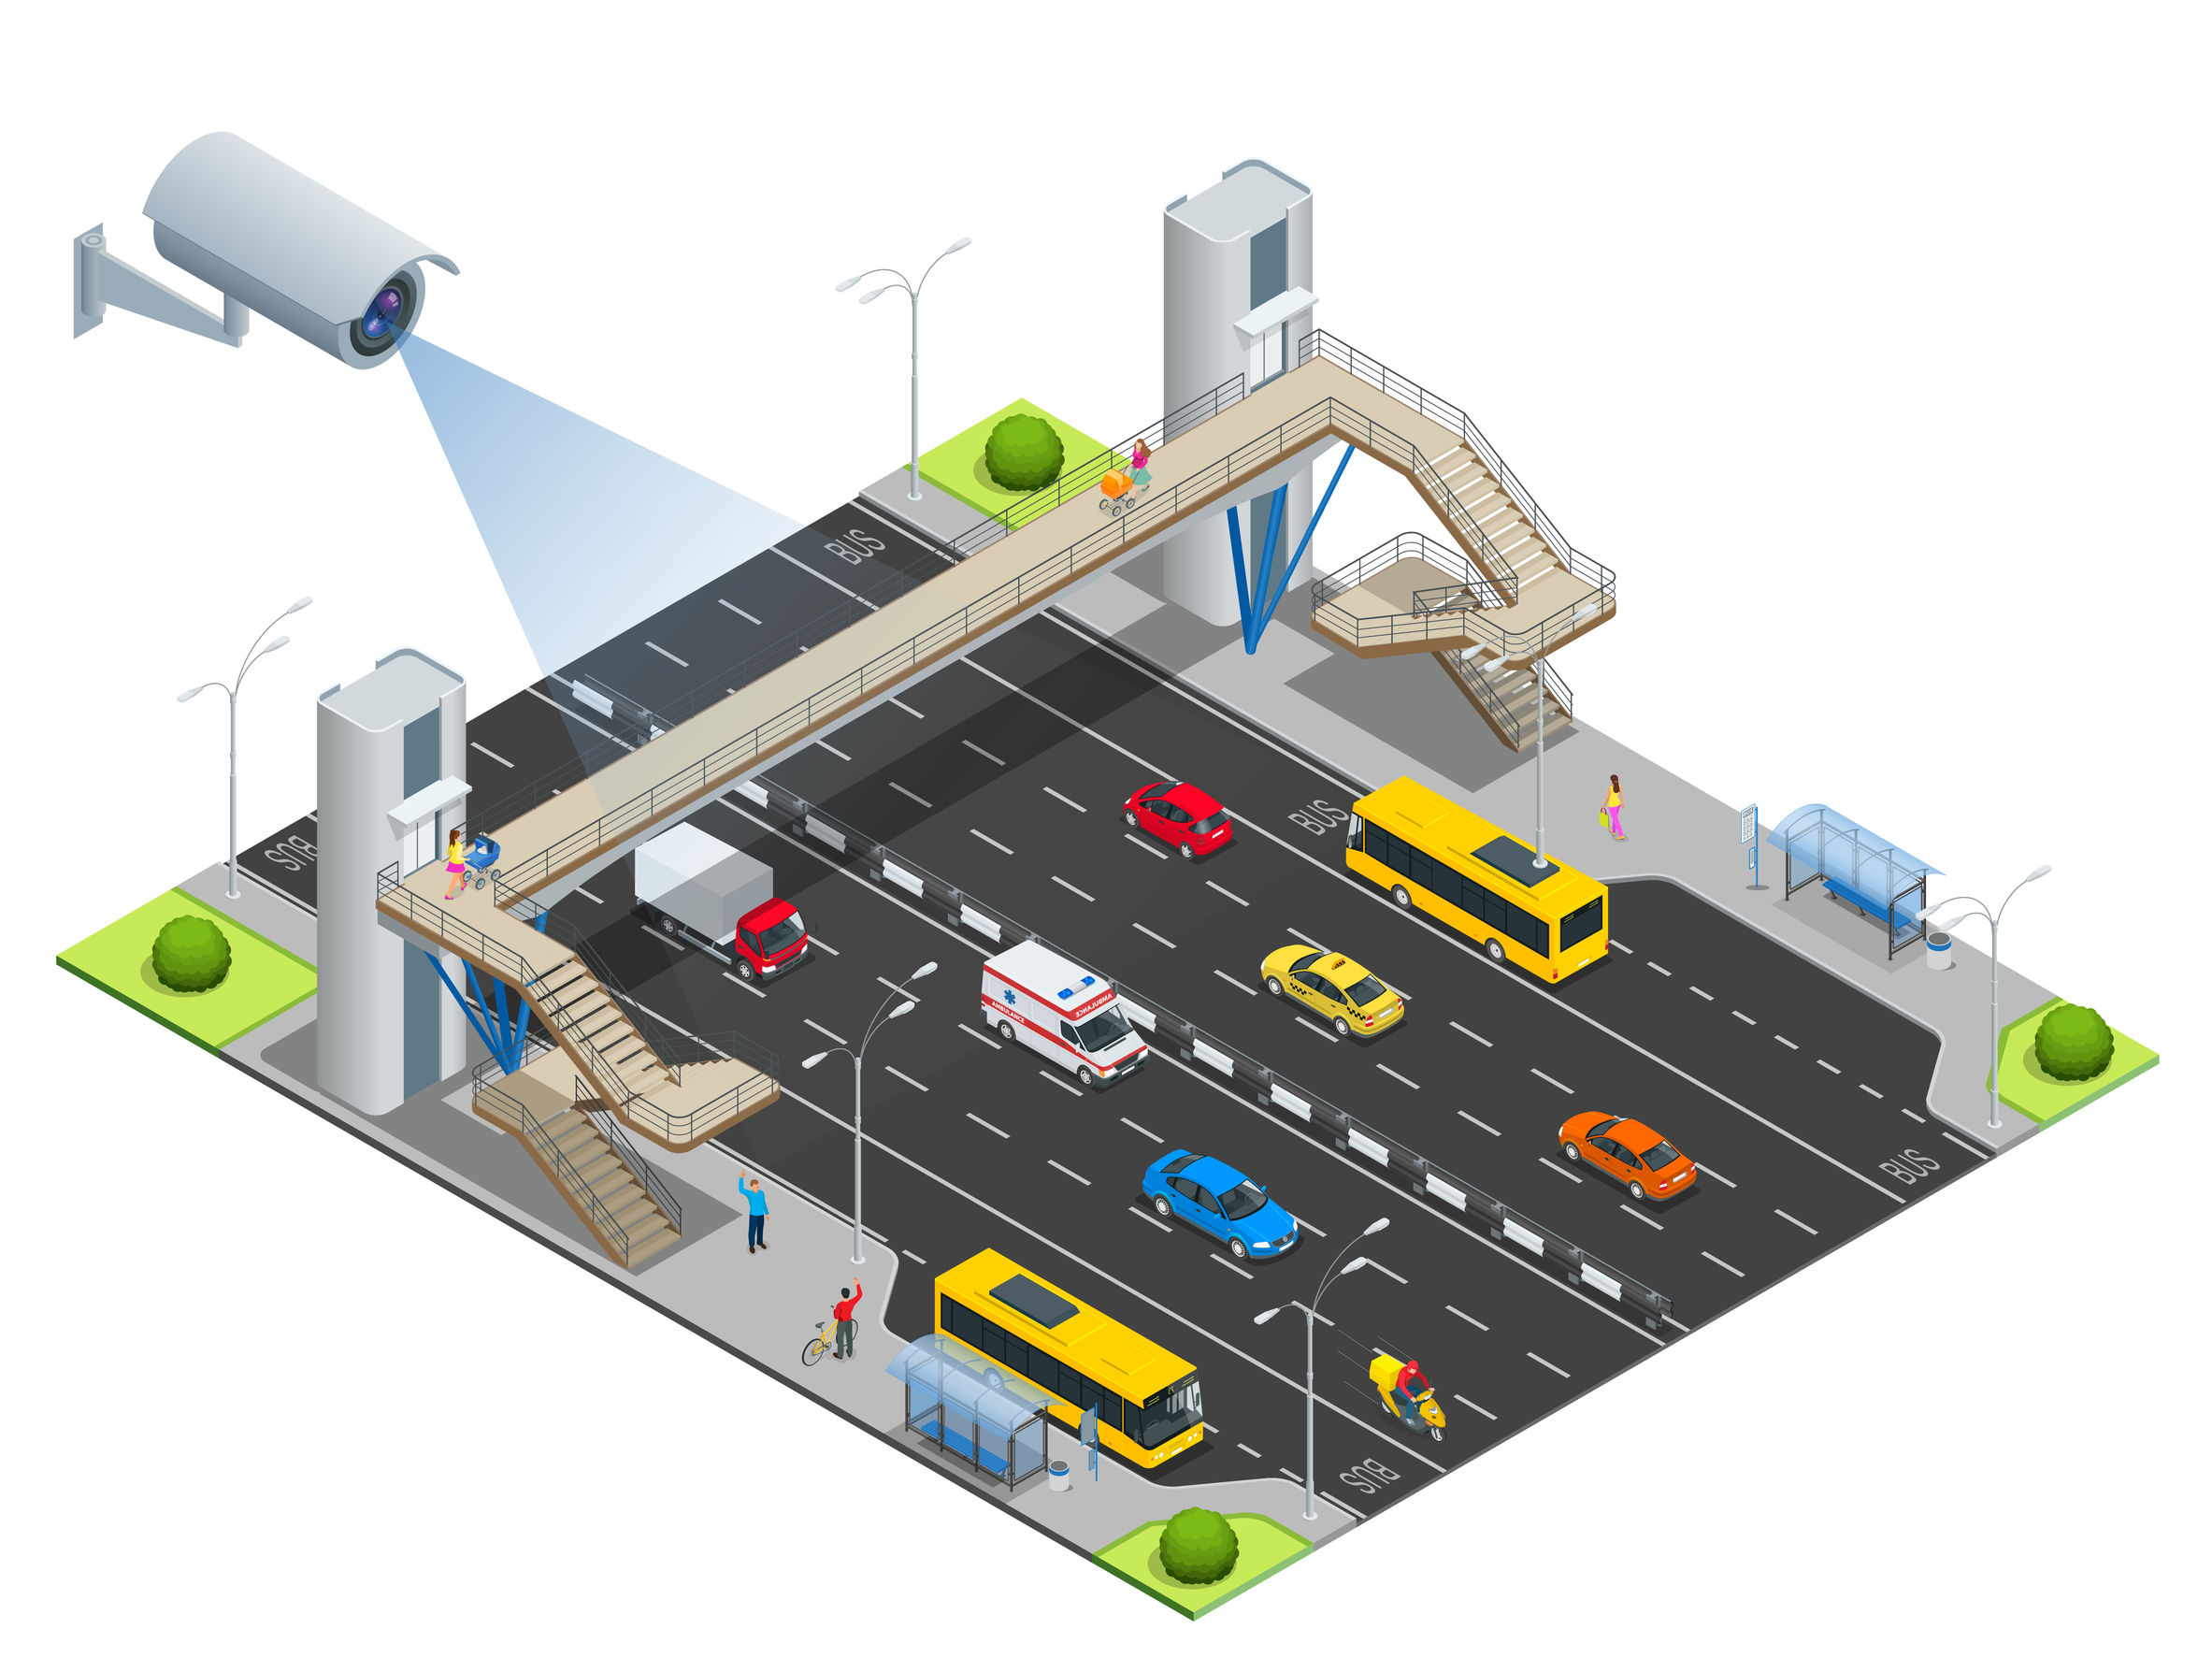 54184447 - security camera detects the movement of traffic. cctv security camera on isometric illustration of traffic jam with rush hour. traffic 3d isometric vector illustration. traffic monitoring cctv